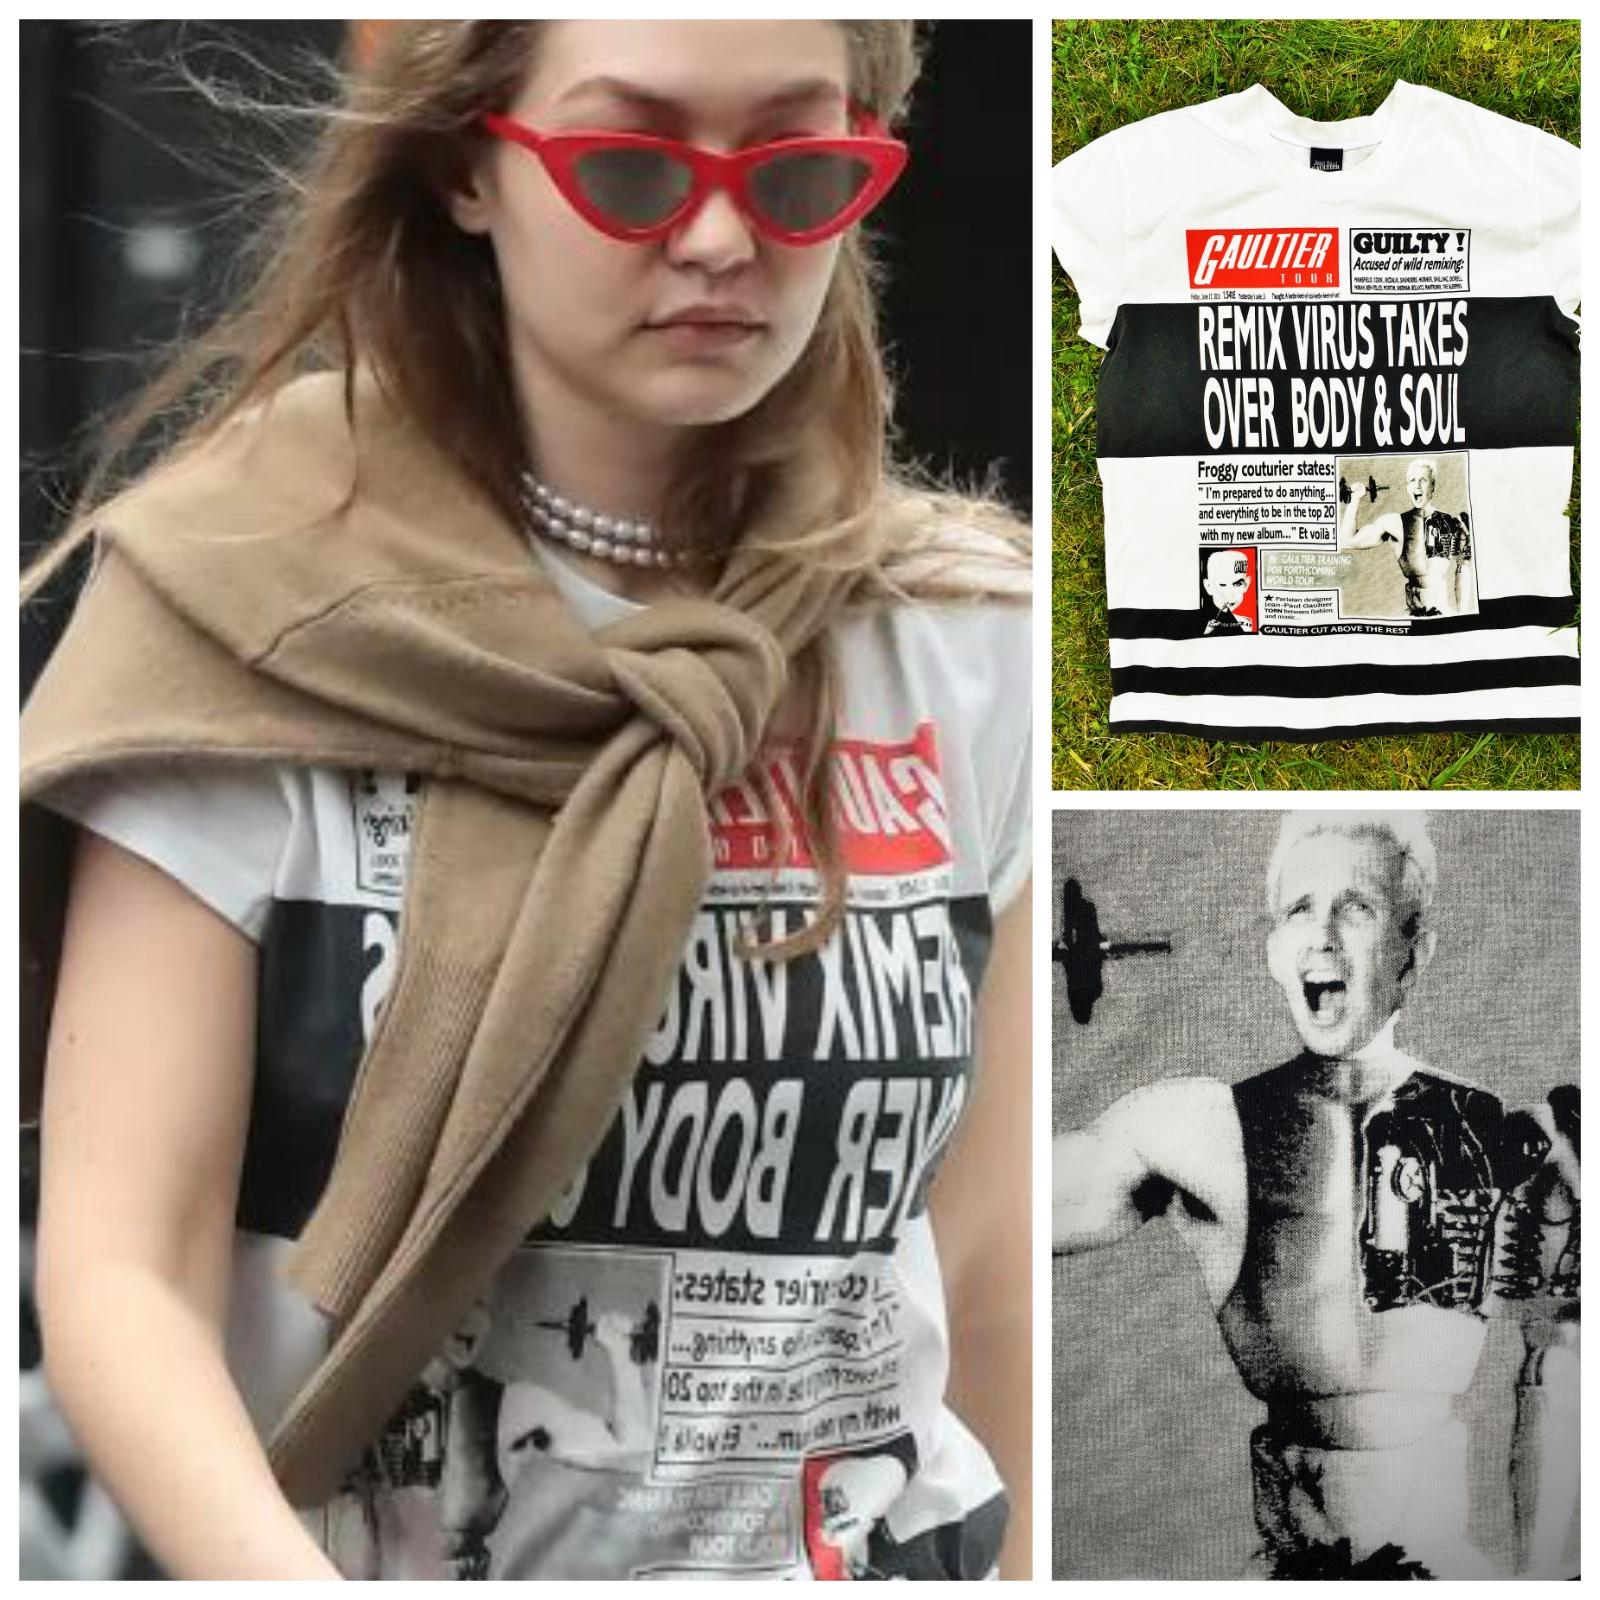 Vintage newsletter top by Jean Paul Gaultier!
Gaultier is in the news:) Remix virus takes body & soul!
The same top is worn by Gigi Hadid and Kourtney Kardashian!

New with tag!

SIZE
Women: fits from large to XL.
Men: medium.
Marked size: XL.